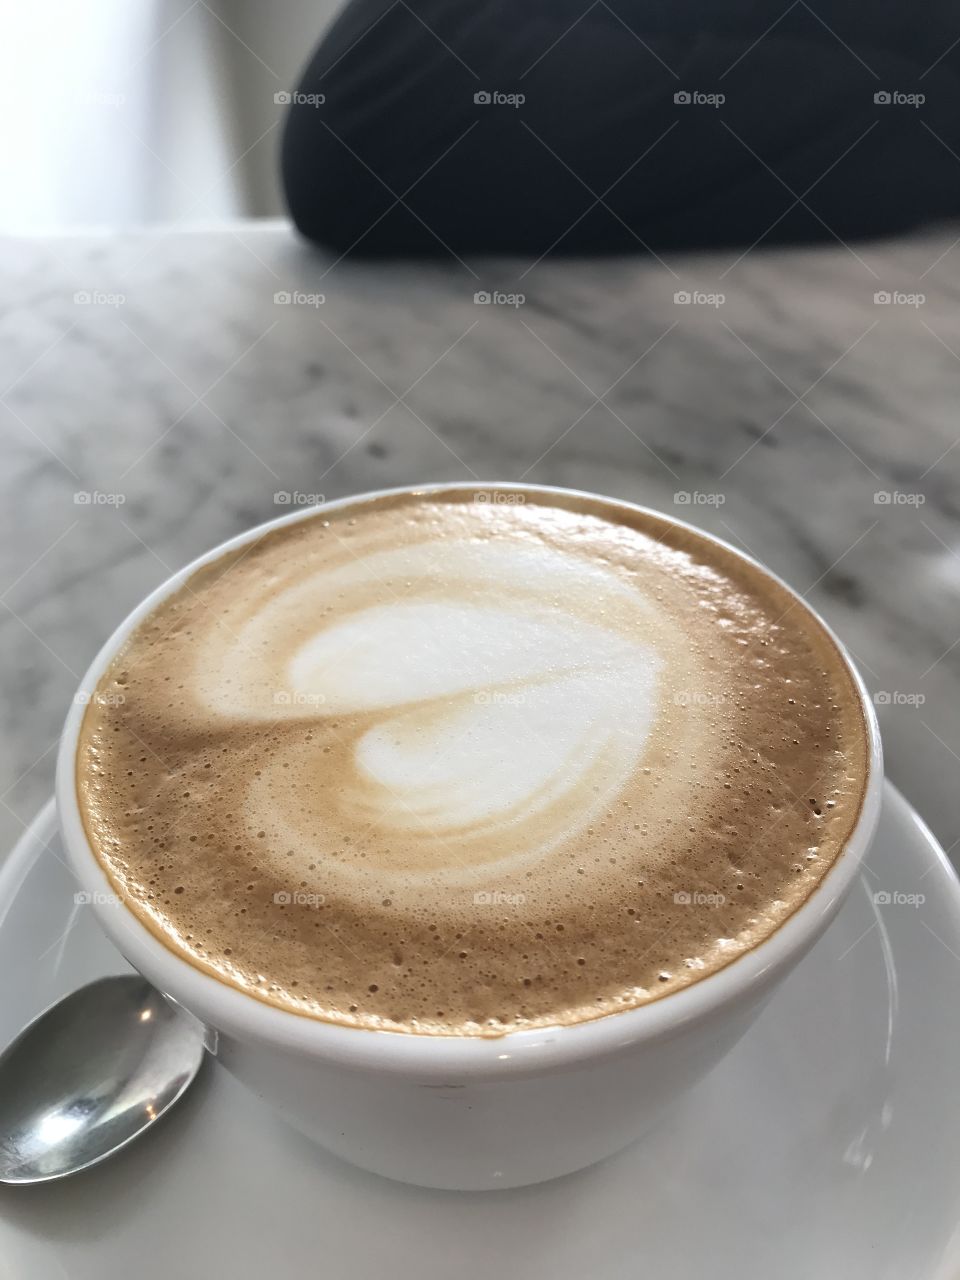 Cappuccino with a heart shape